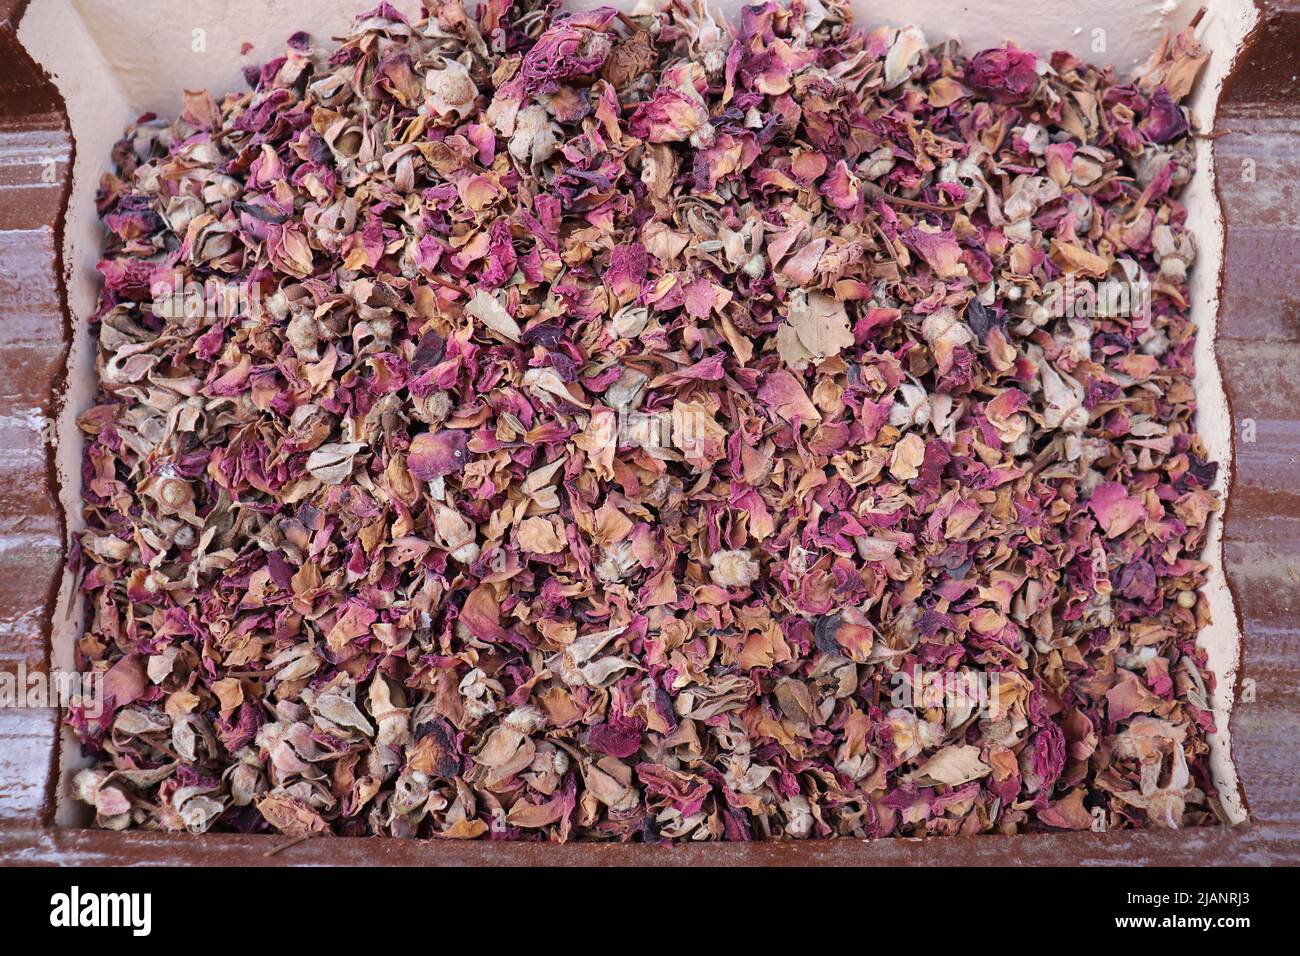 dried rose petals from spicy shop in aswan Stock Photo